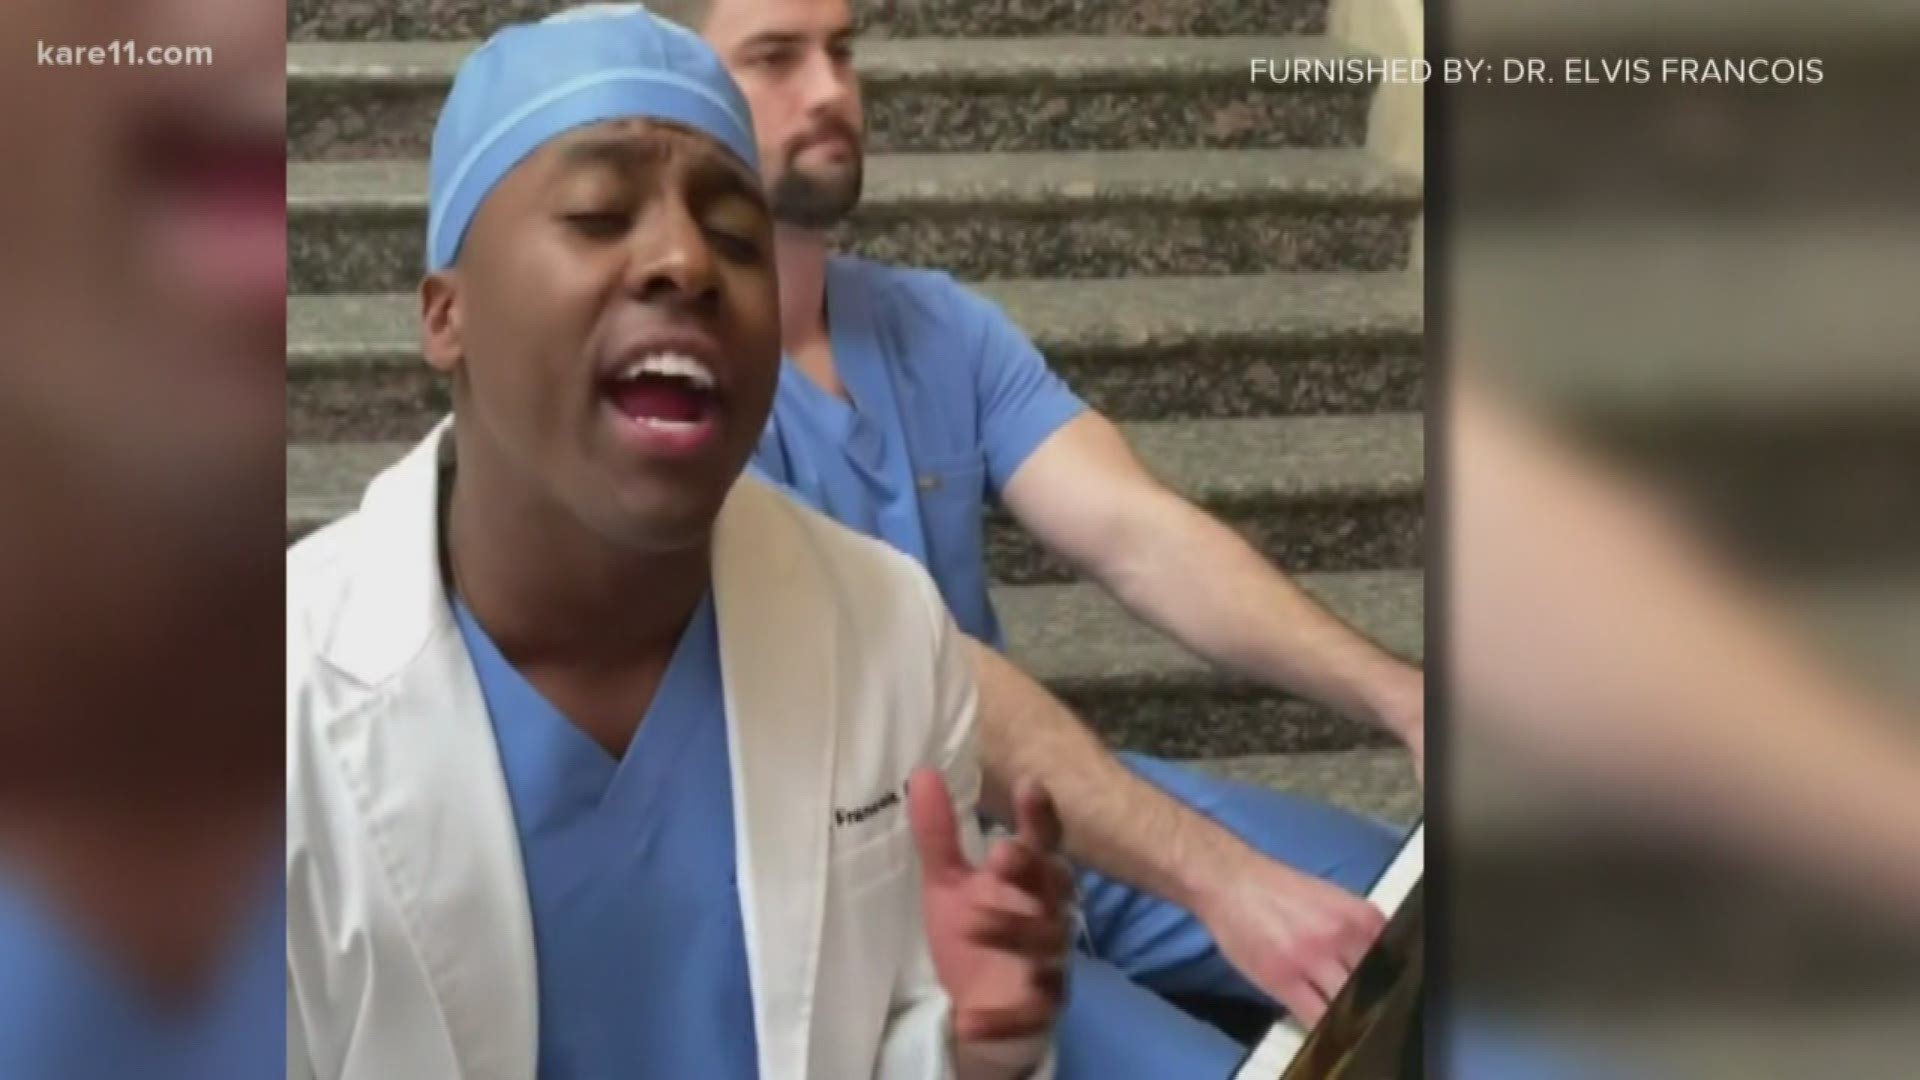 Mayo doctors share story behind viral 'Imagine' rendition